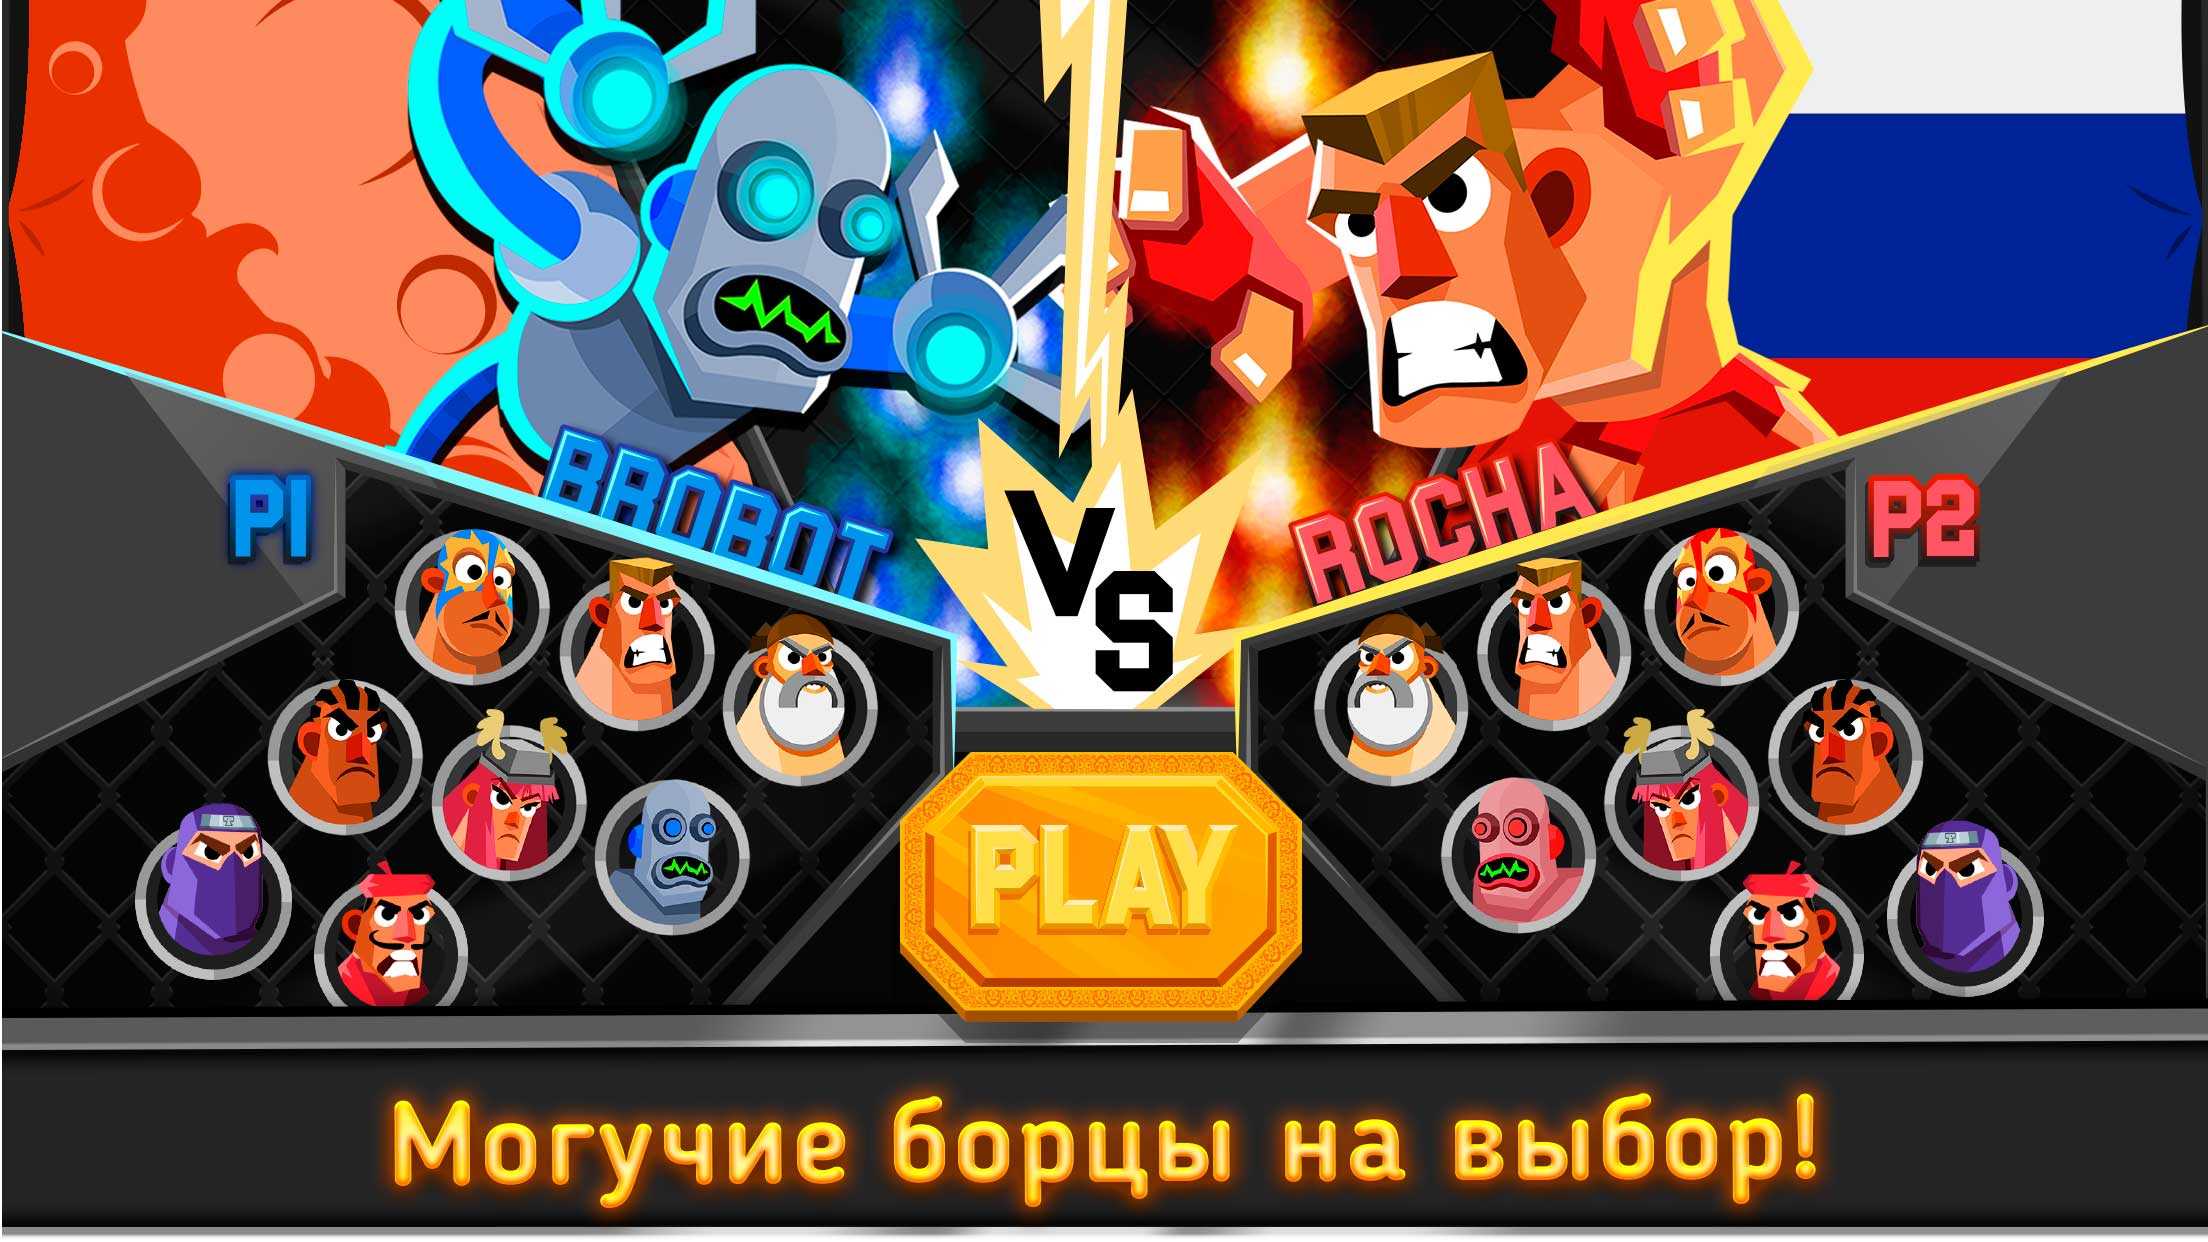 Игра забавный бой. Fighting 2 Players. Fight Players for game. UFB.